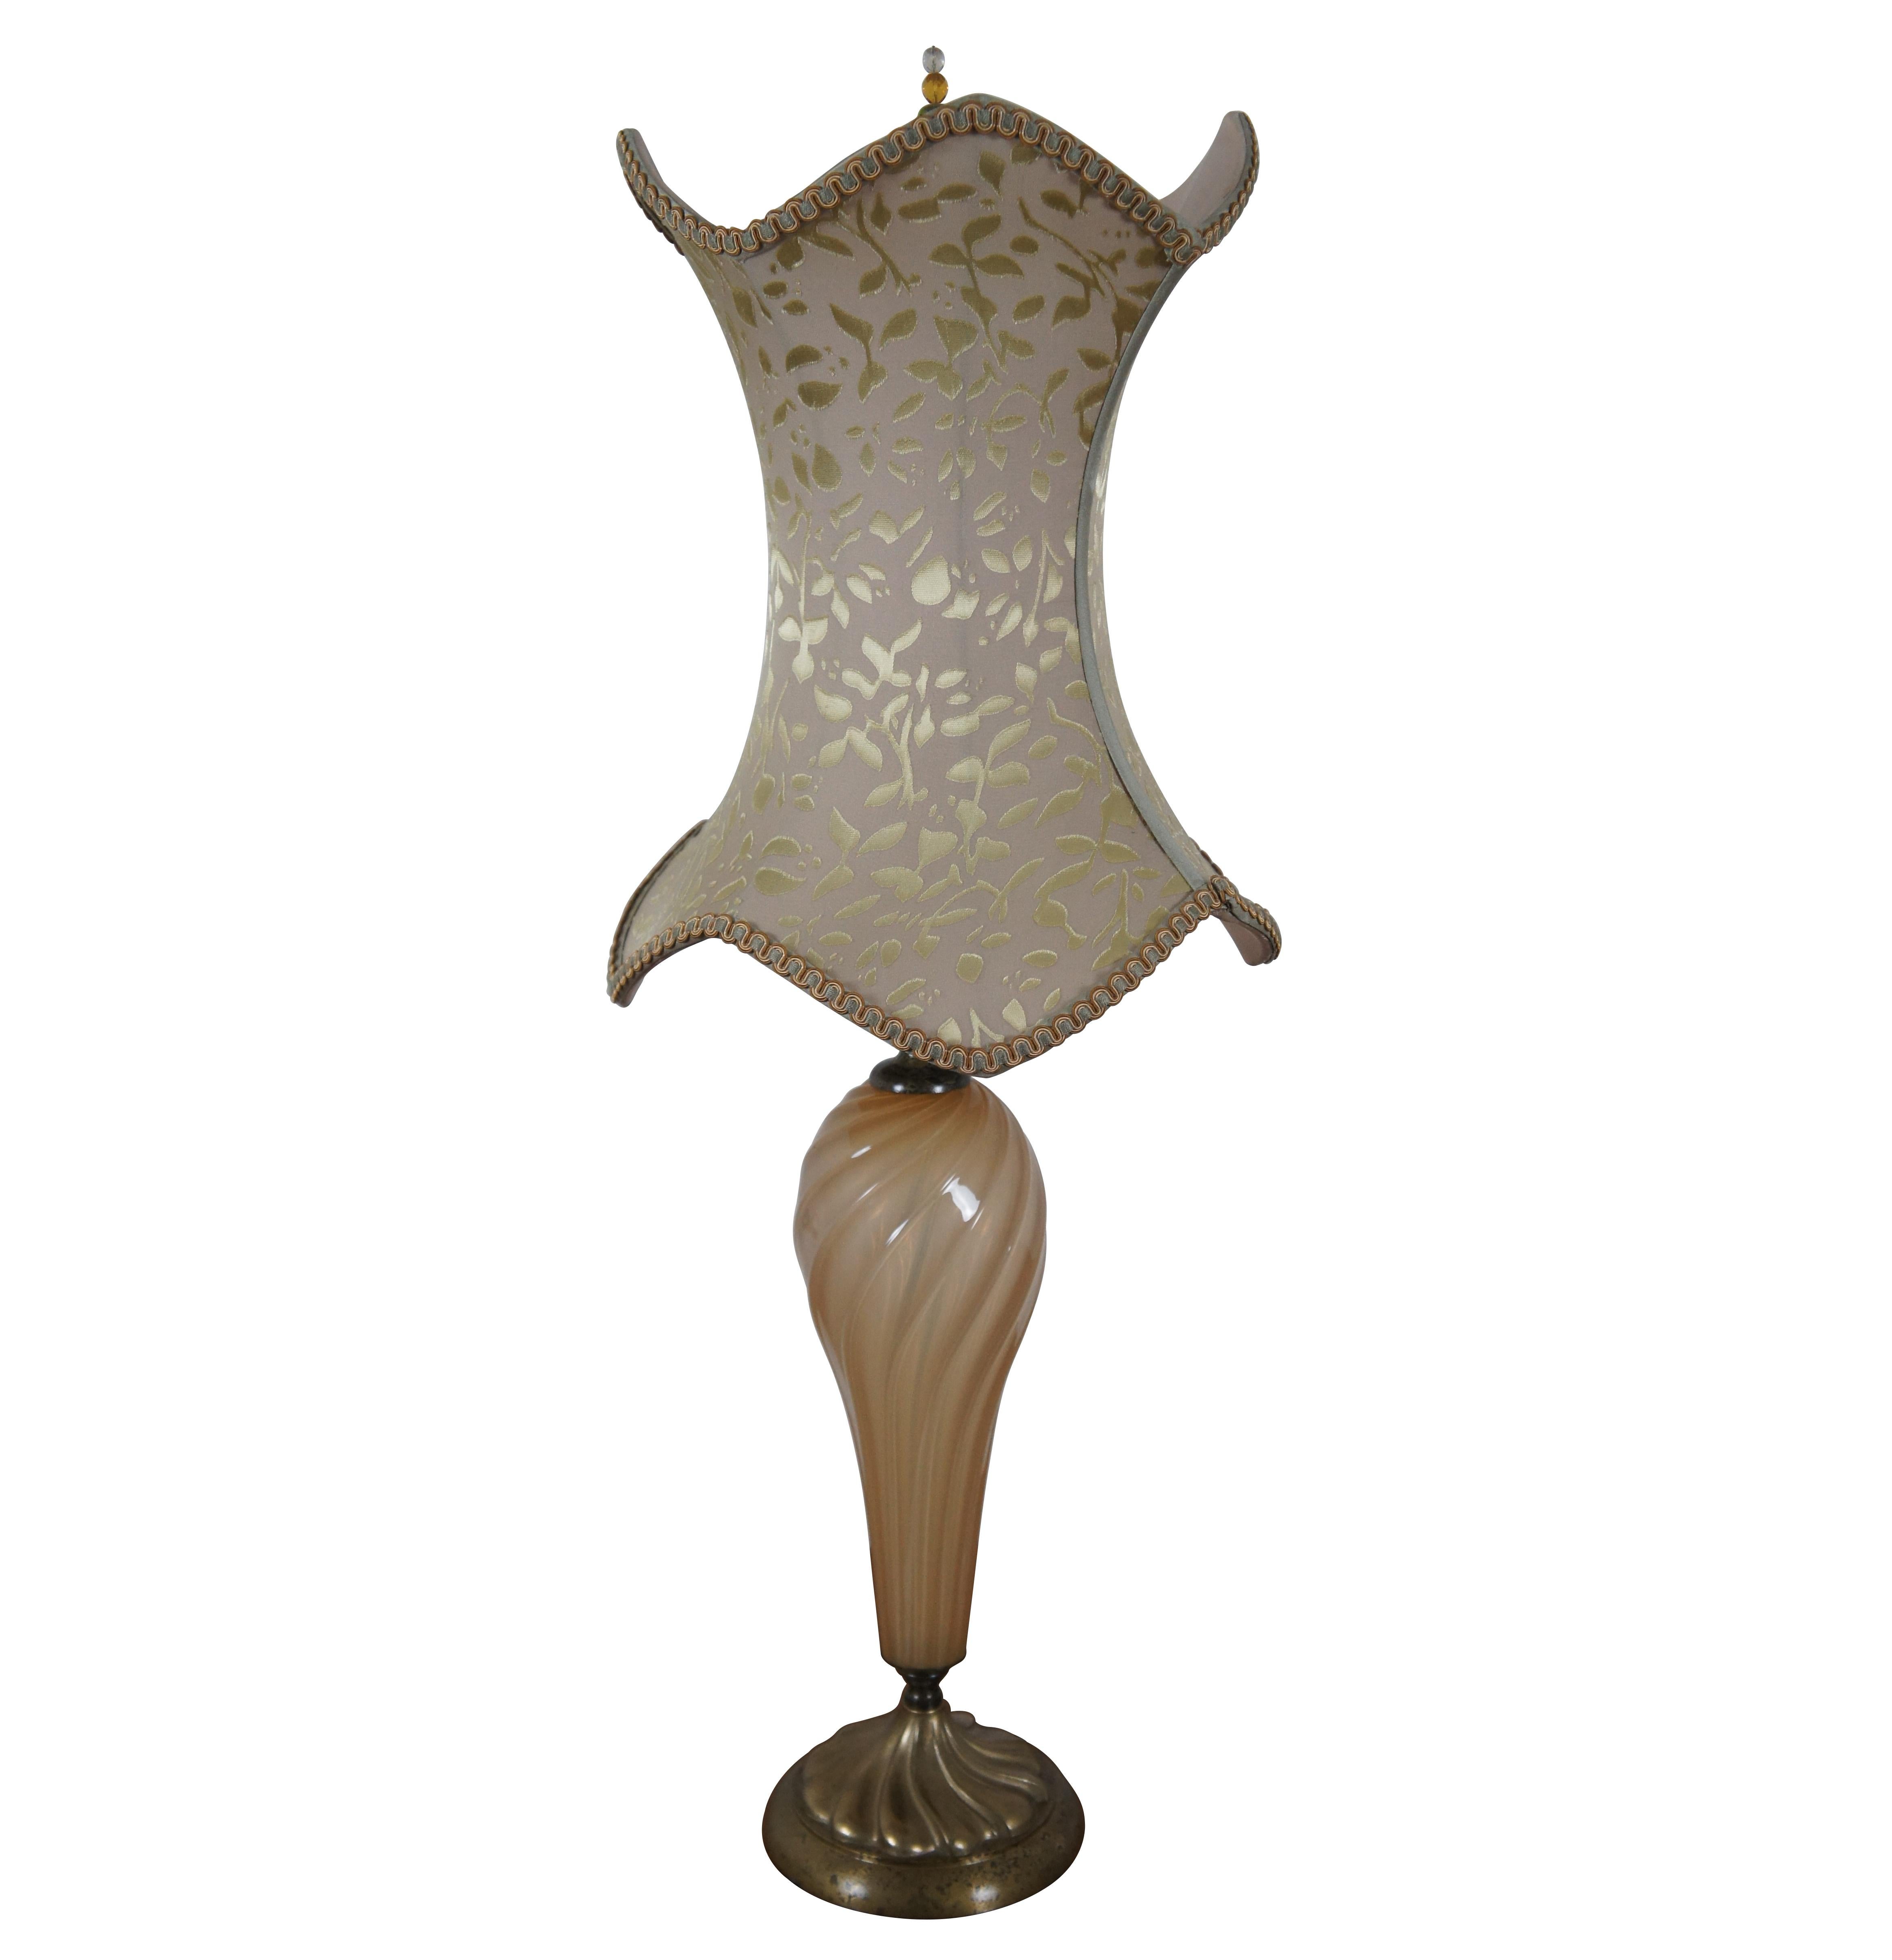 Melissa is a striking mixed media table lamp by Kinzig Design with a gold colored, swirling blown glass body set onto a brass base with copper coiled around the neck of the lamp. Its sexy, tall corset shaped, round, burnt velvet shade is covered